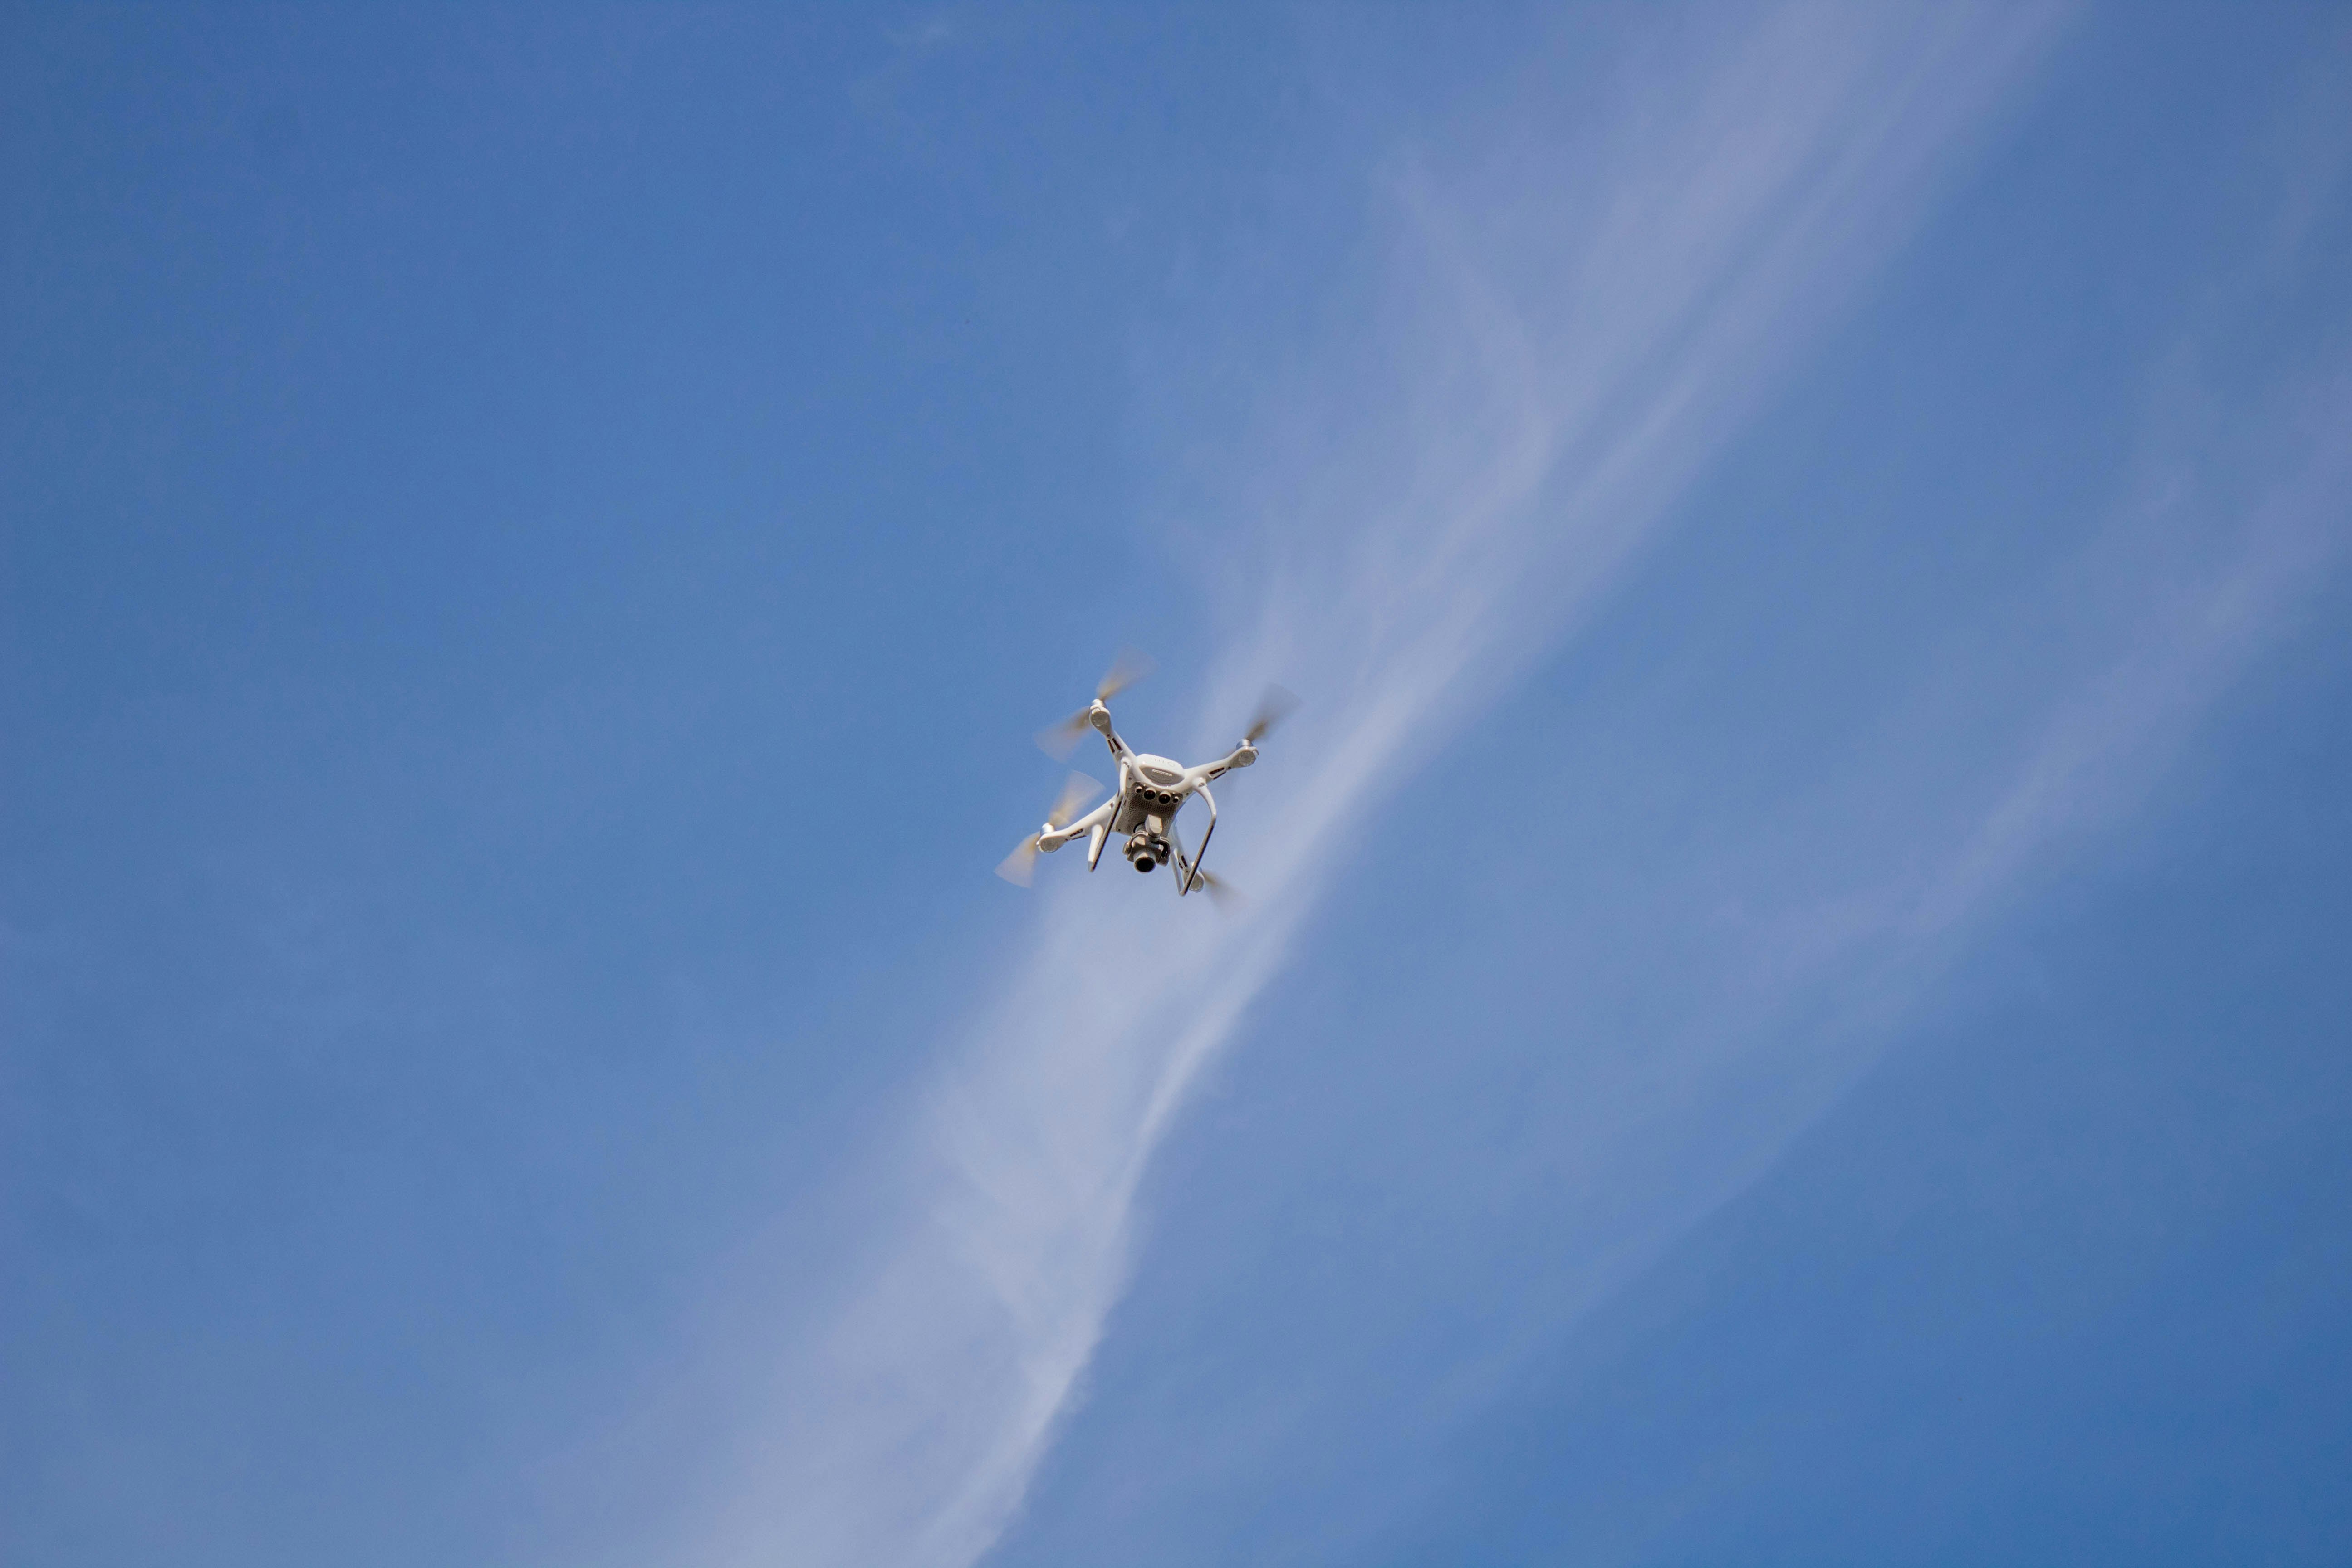 low-angle photography of flying white quadcopter drone at daytime